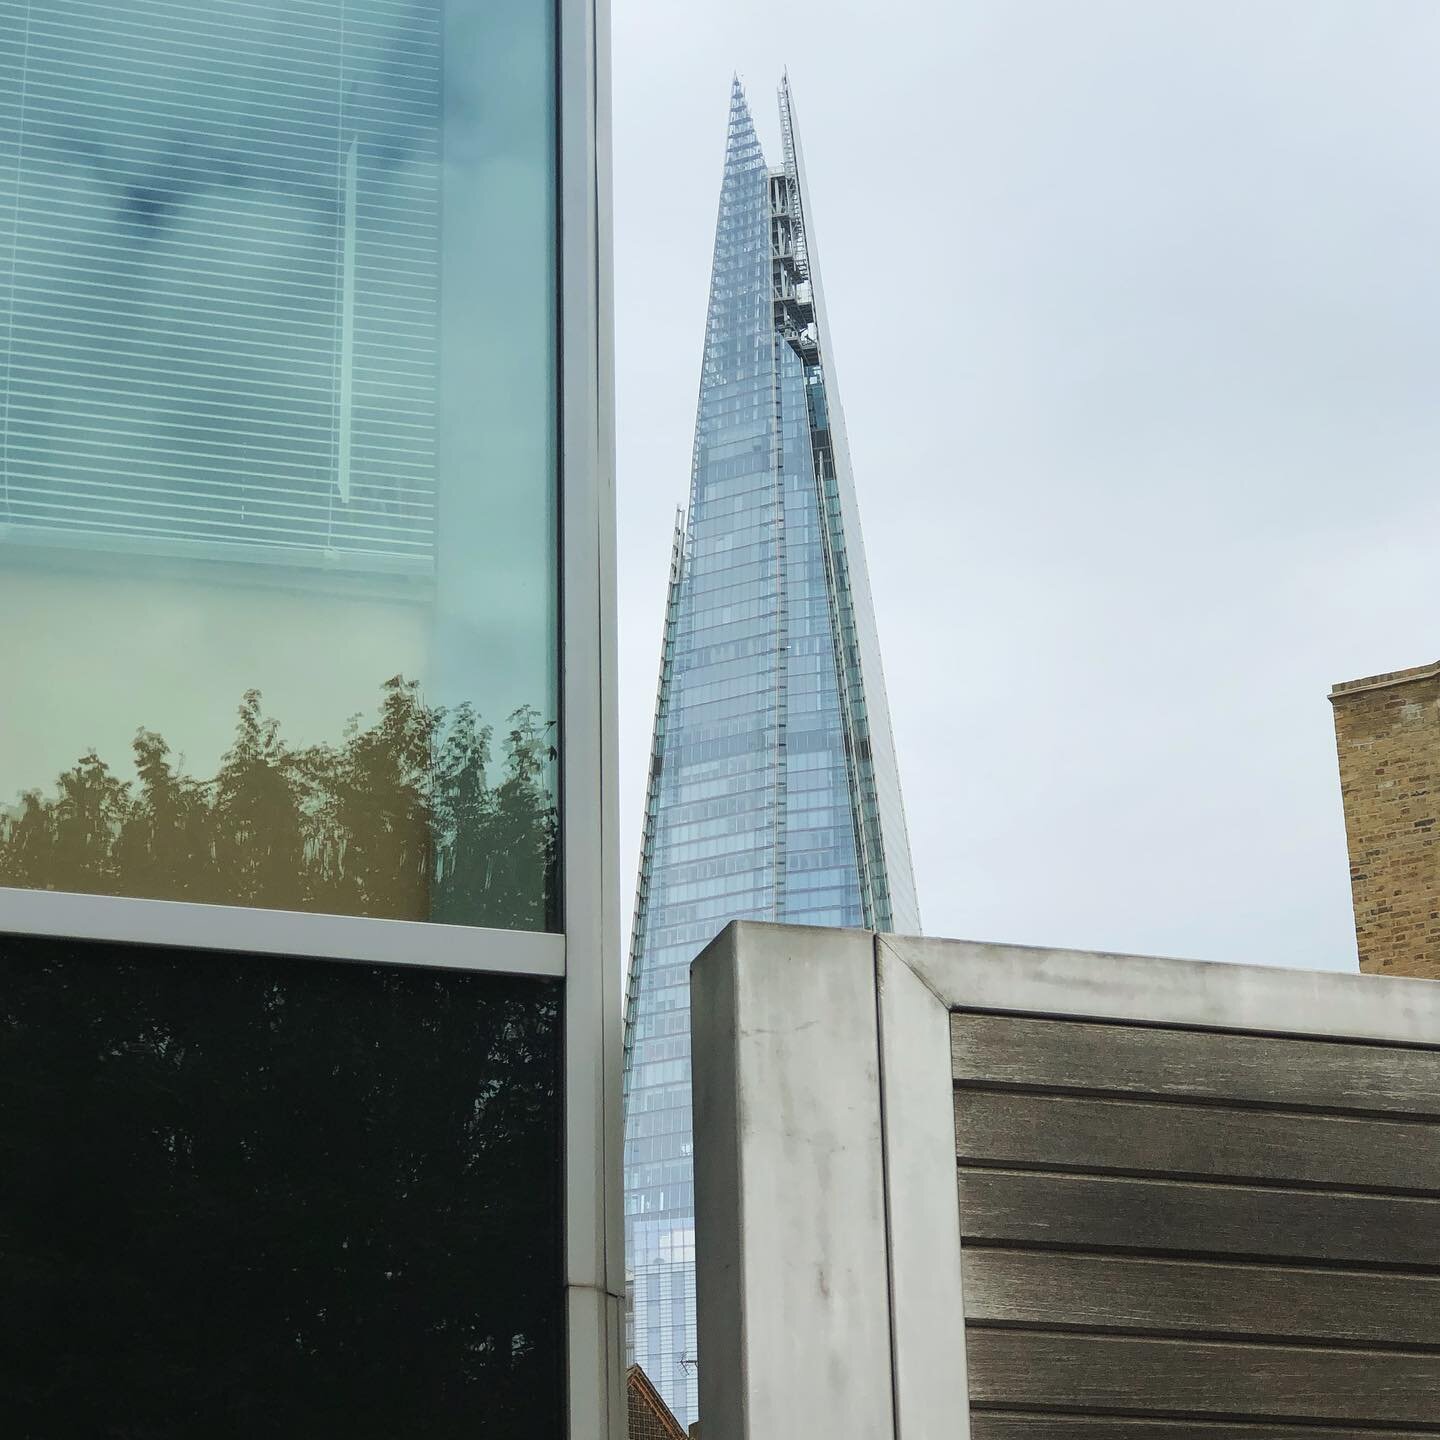 I met some lovely clients in London last week, what joy. Afterwards I took some cityscape photos. I am fascinated by the juxtaposition which tall buildings have to their surroundings. Have you been to the Shard? the view is breath taking. 
.
.
.
#cit